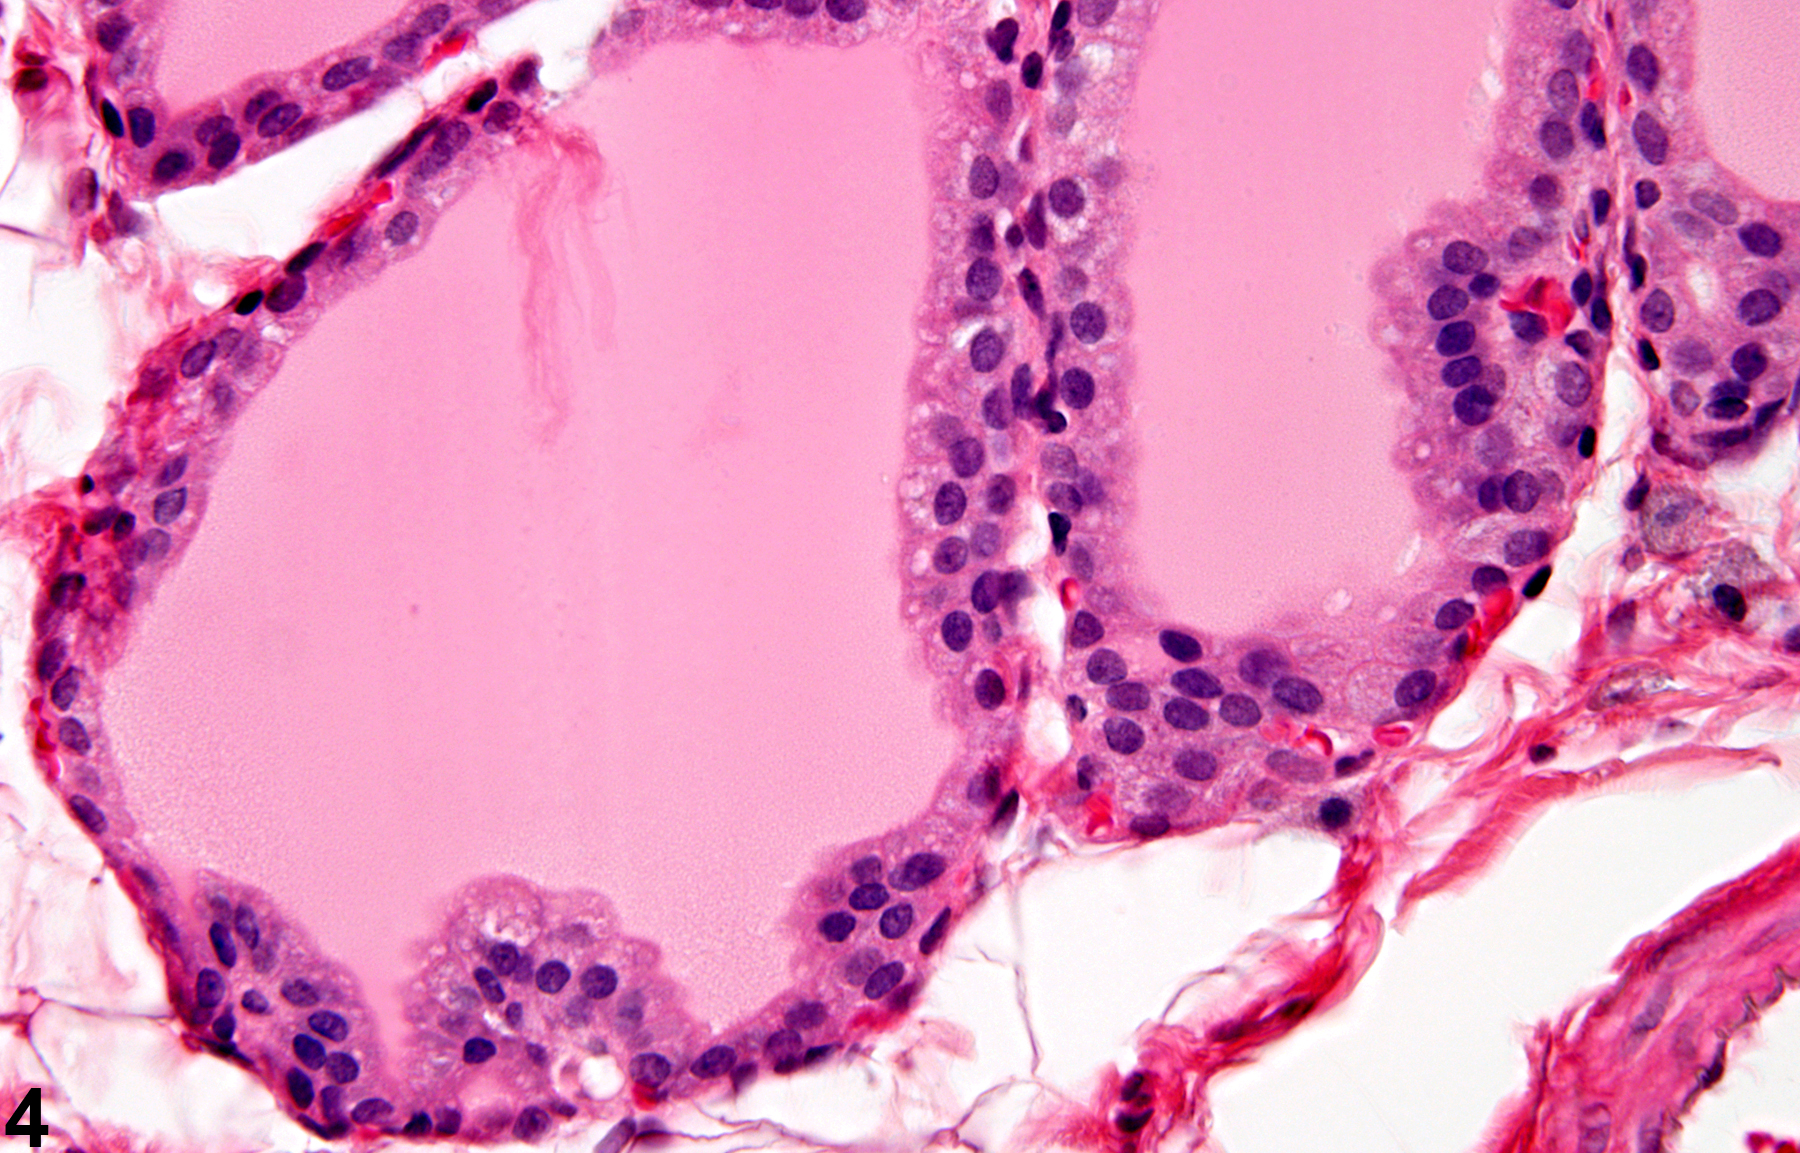 Image of follicle epithelium hyperplasia in the thyroid gland from a male F344/N rat in a subchronic study